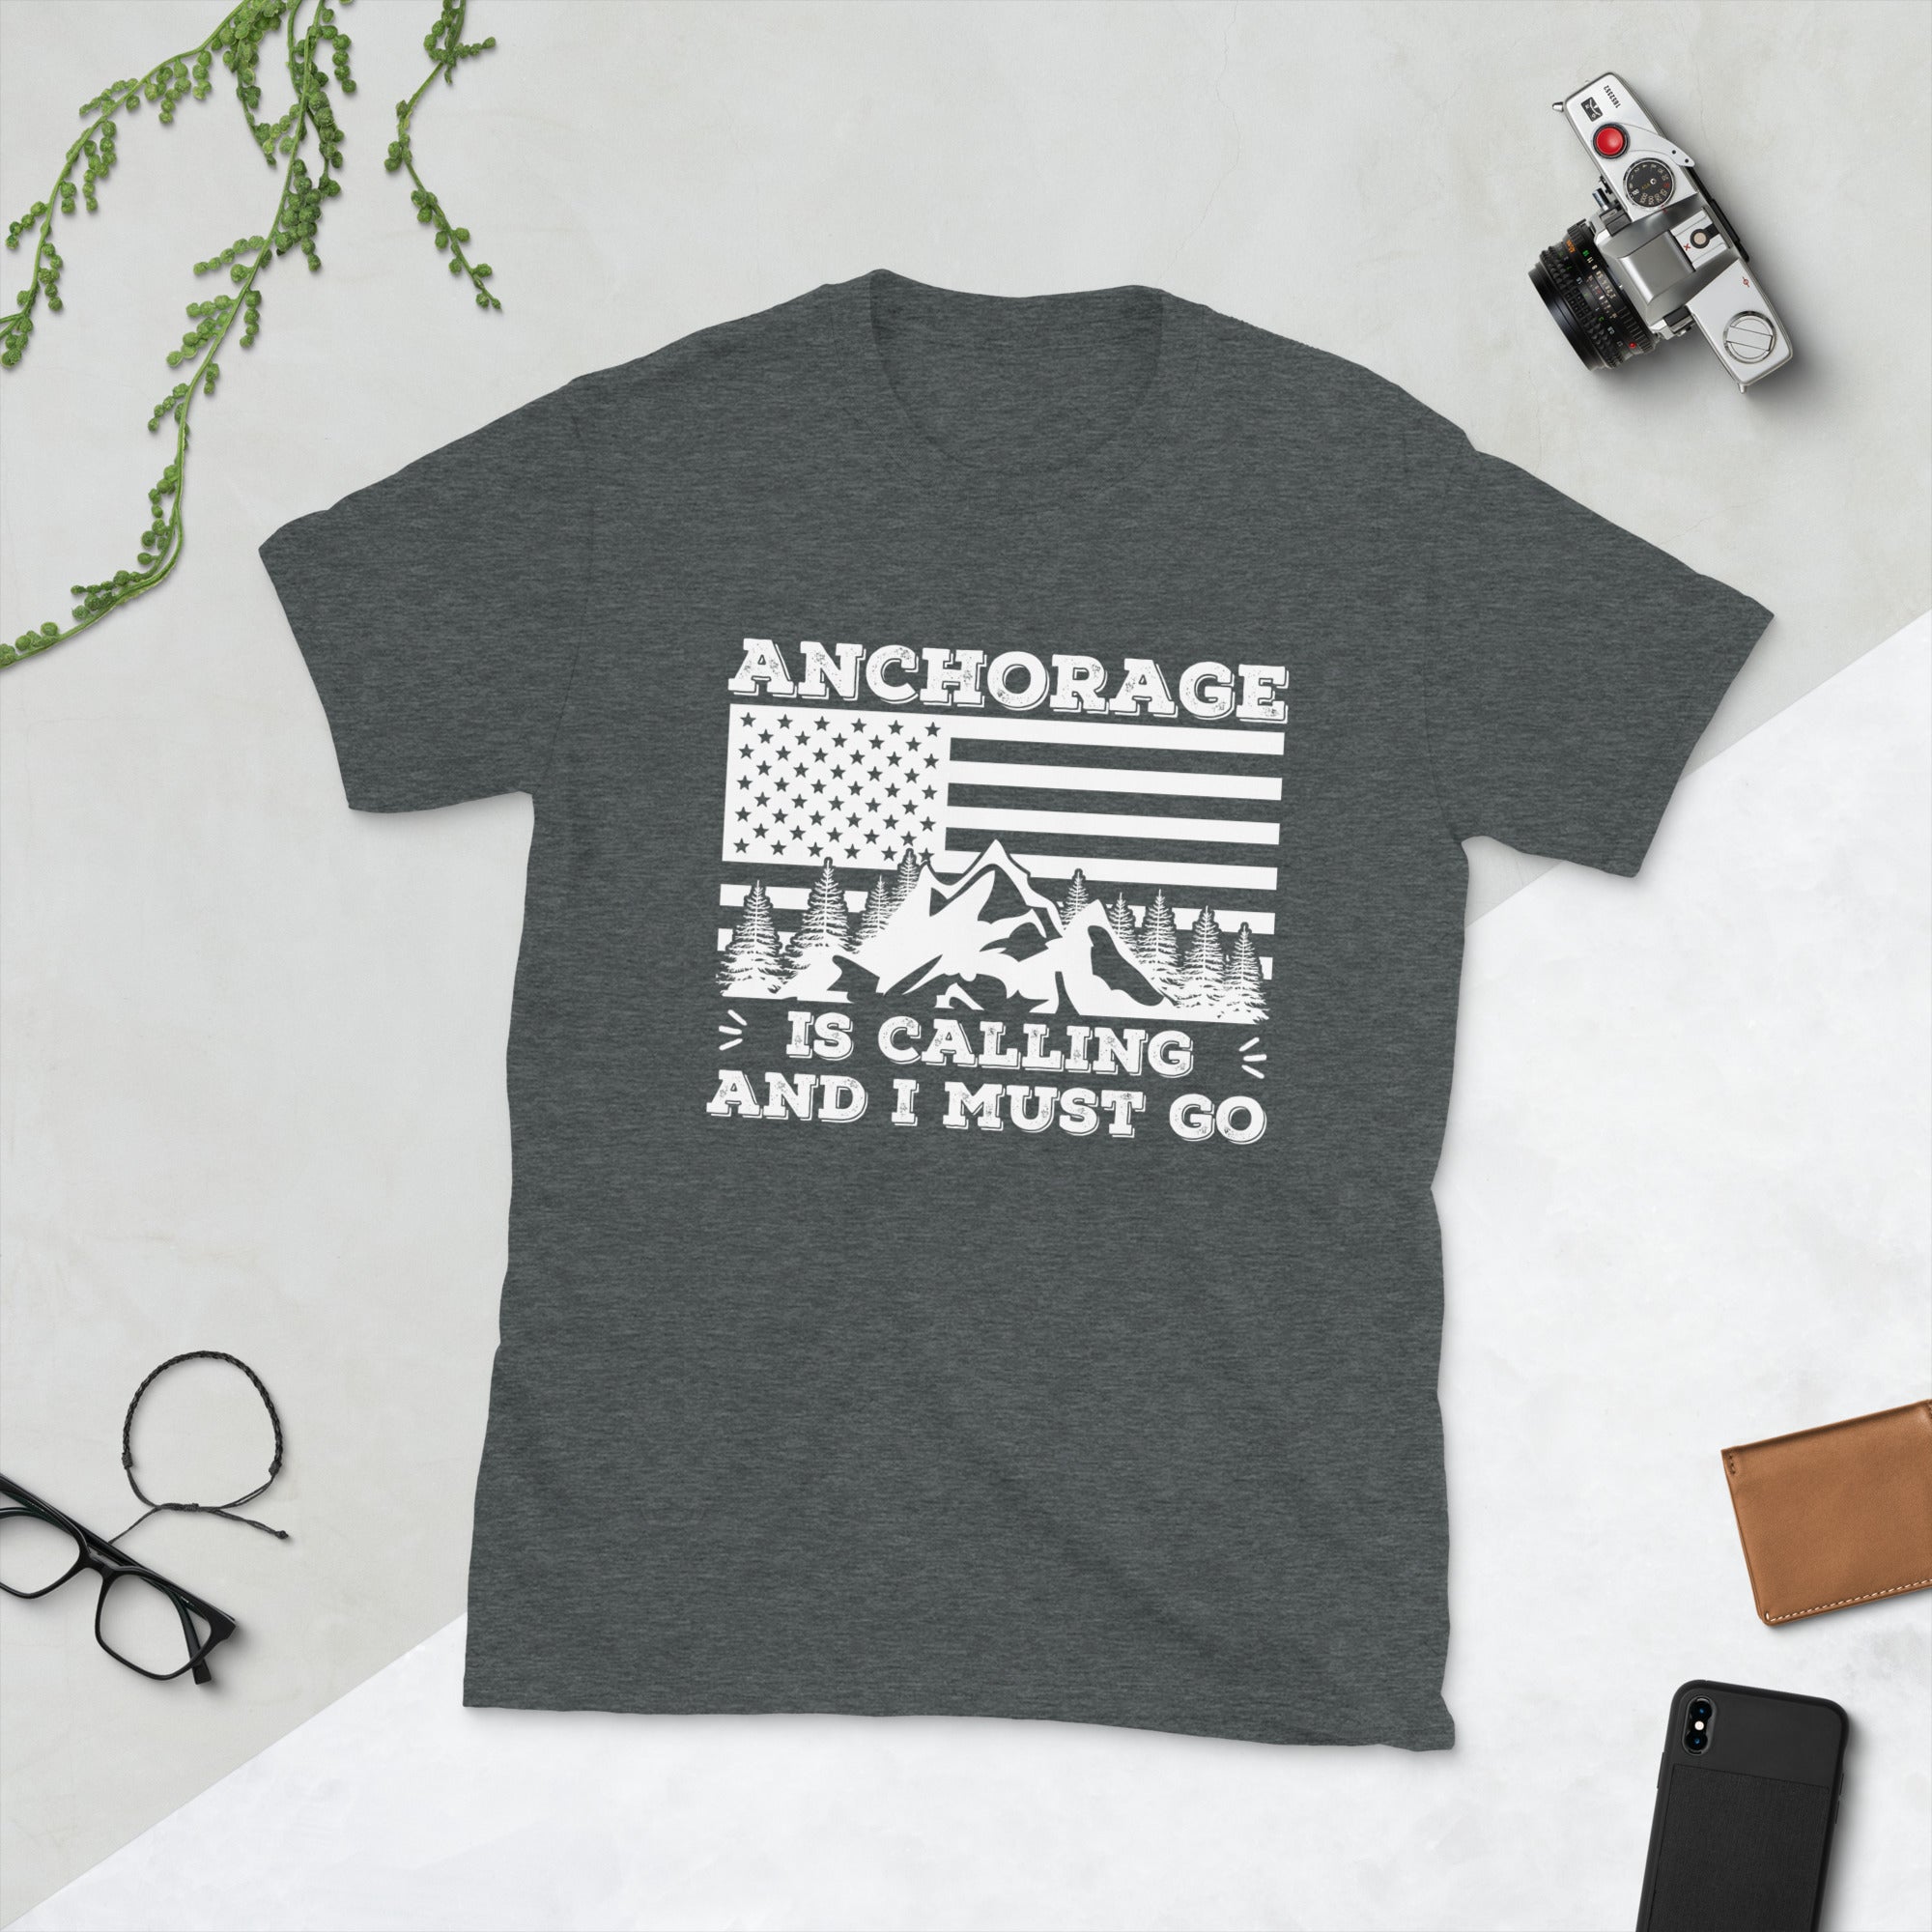 Anchorage is calling and i must go Shirt - Madeinsea©